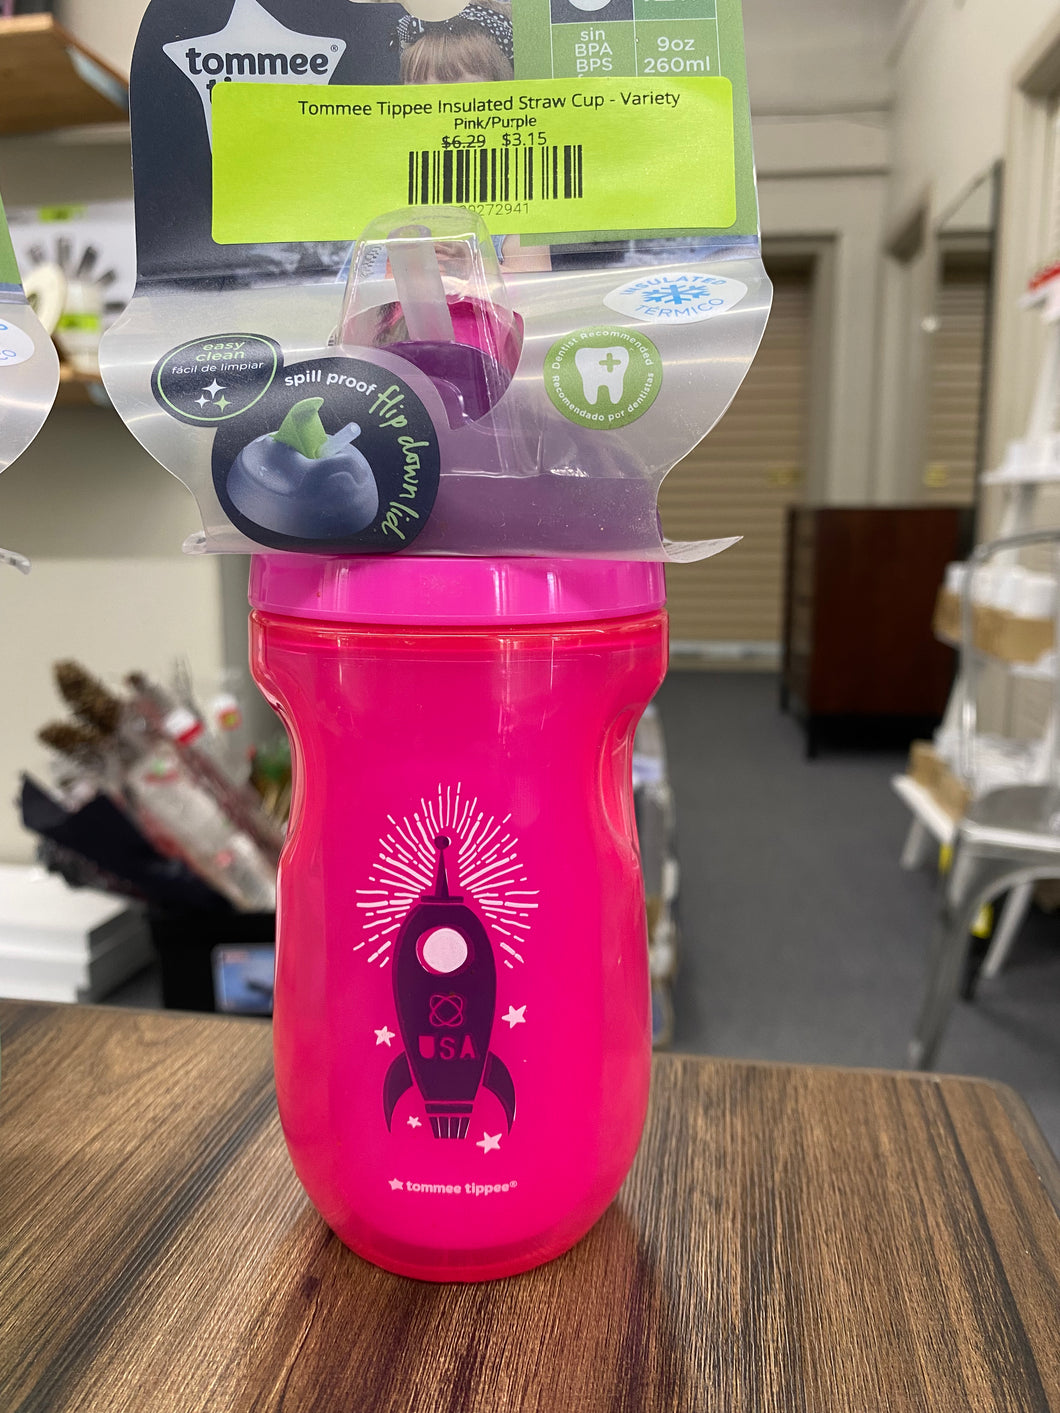 Tommee Tippee Insulated Straw Cup - Variety